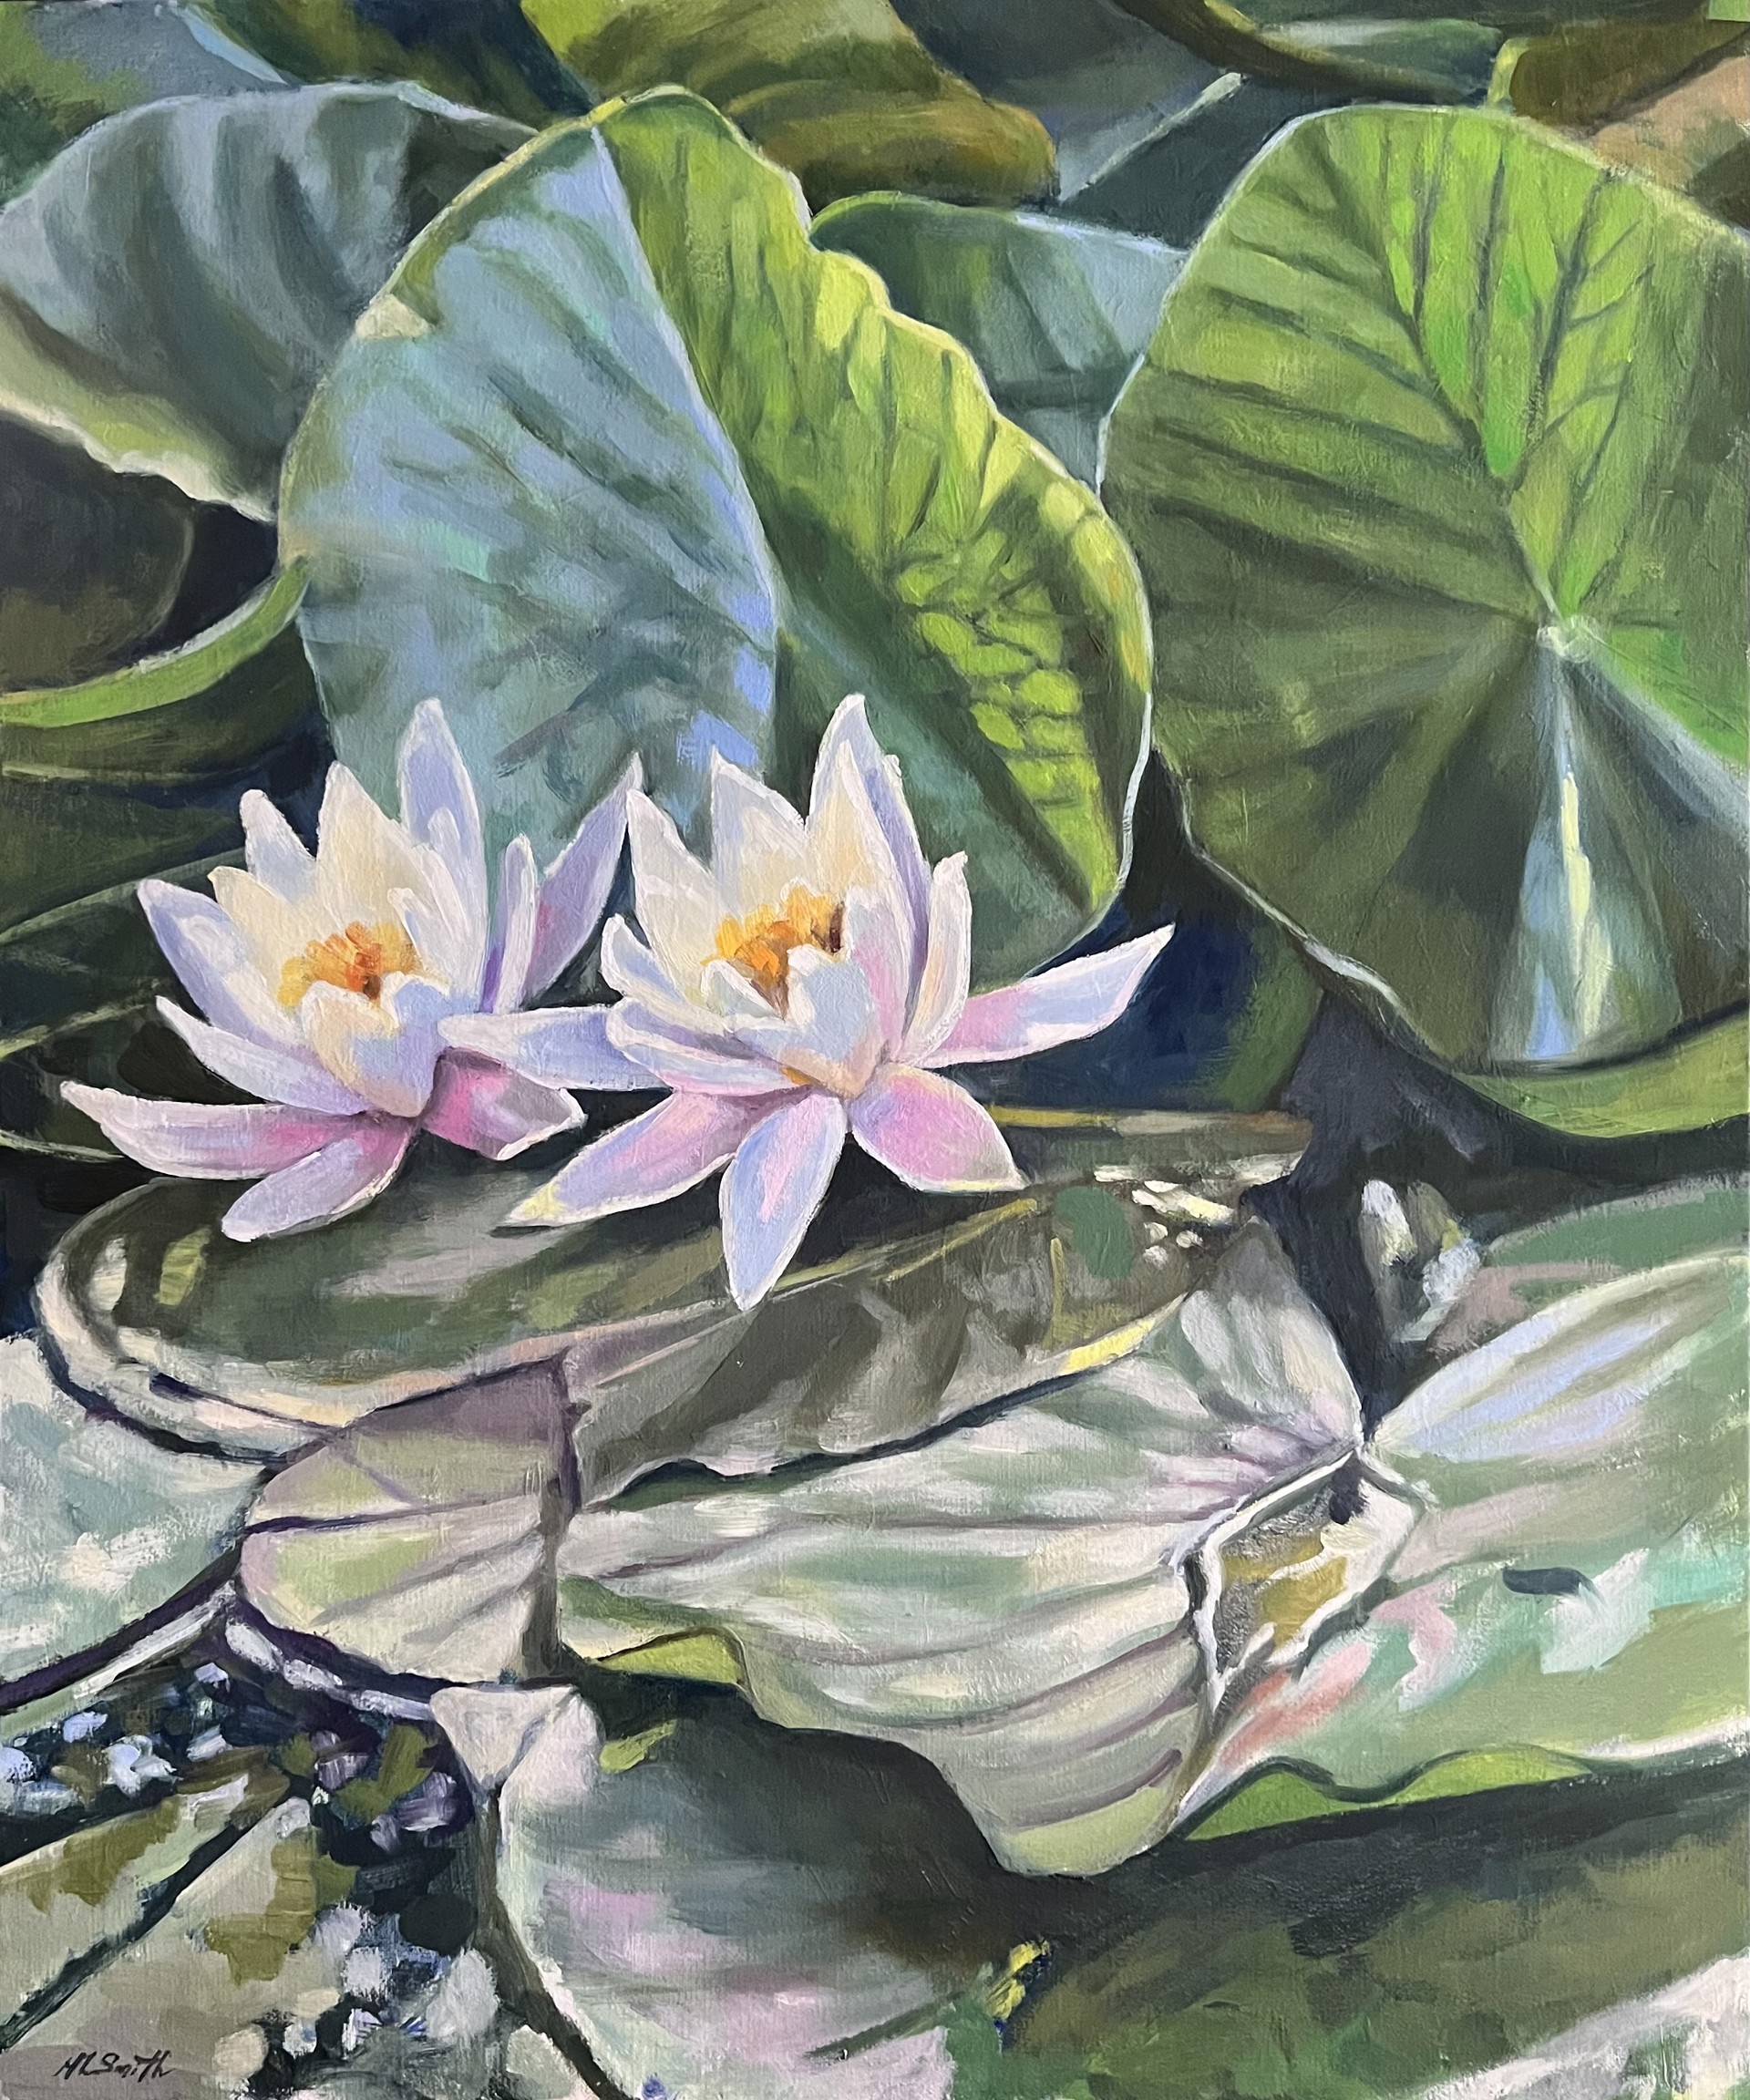 Lotus Purity by Holly L. Smith